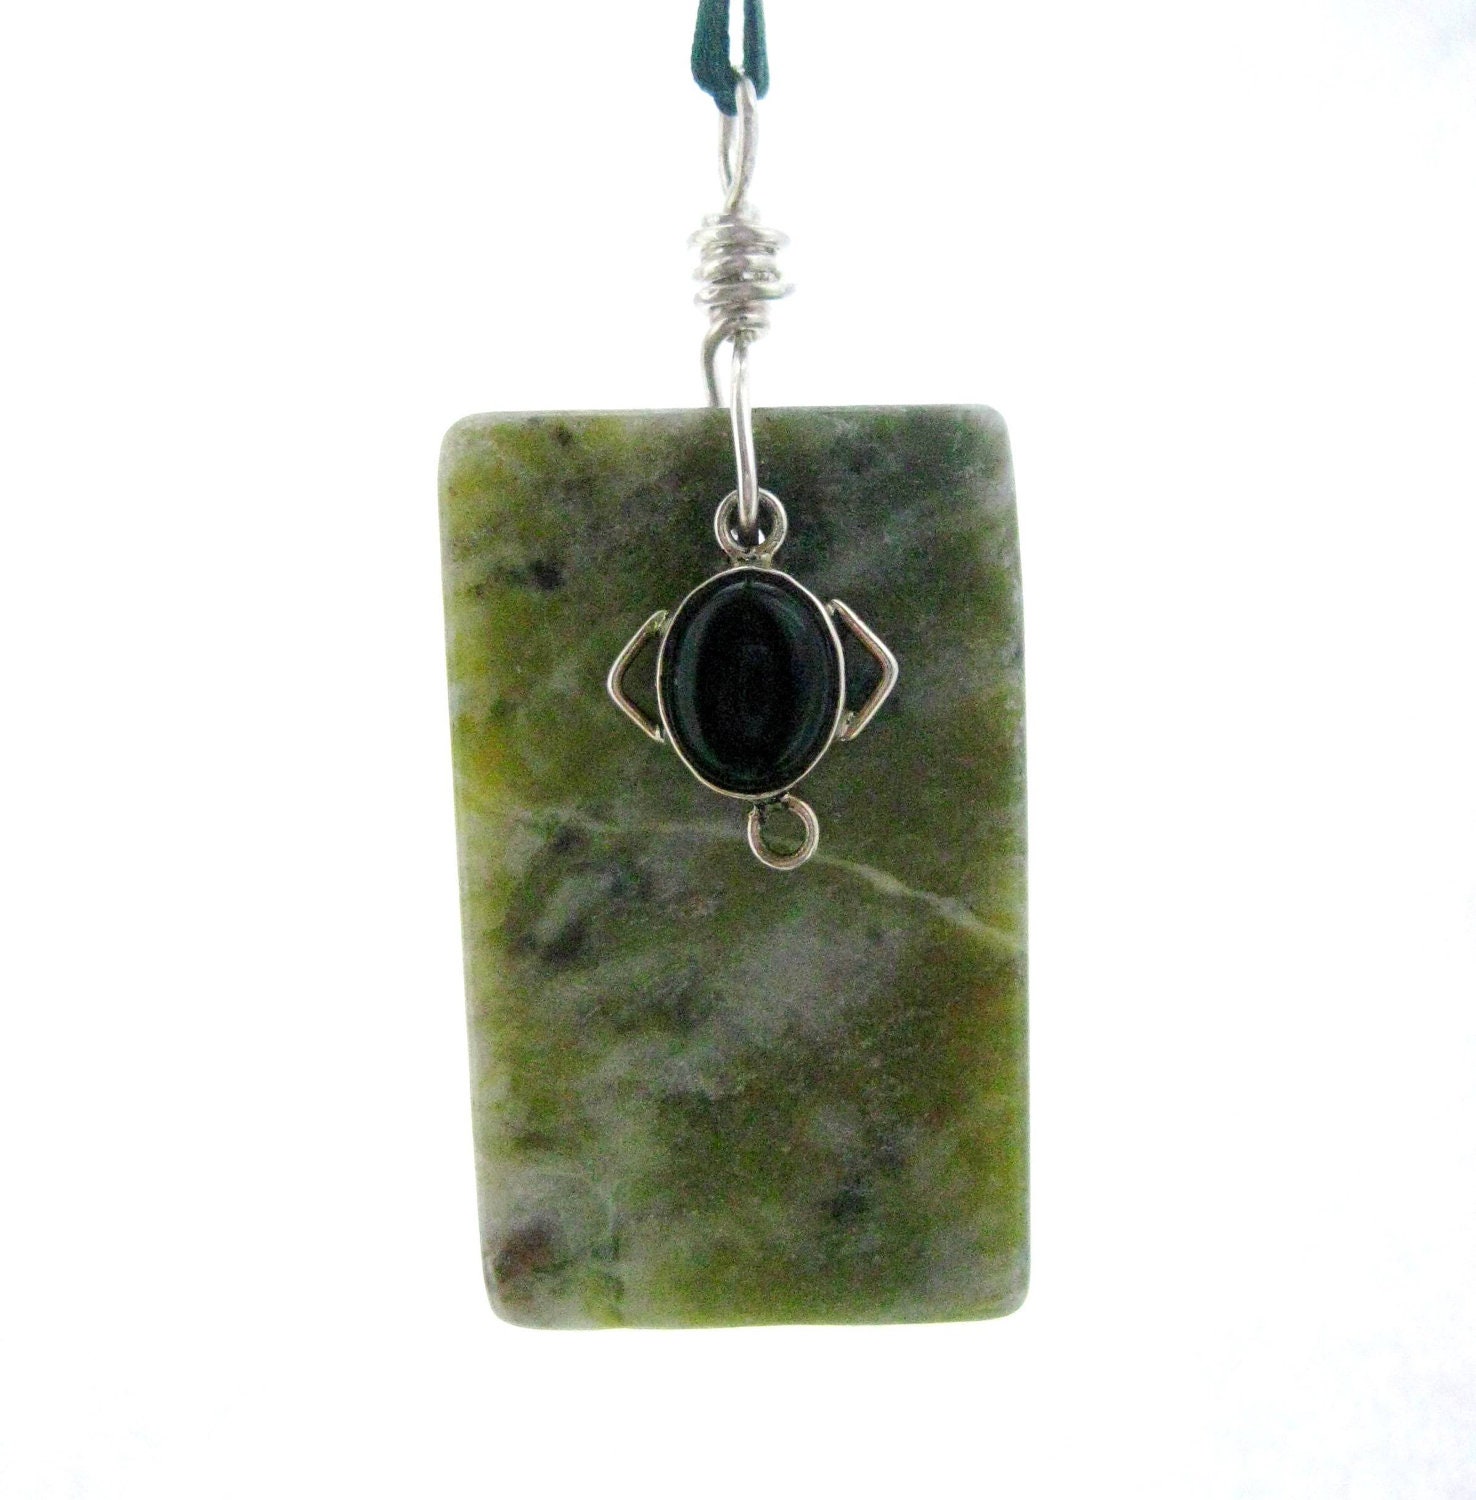 Connemara Marble Ornament. Sterling Silver, Irish Marble & Onyx. Christmas, Patrick's Day, Rear View Mirror